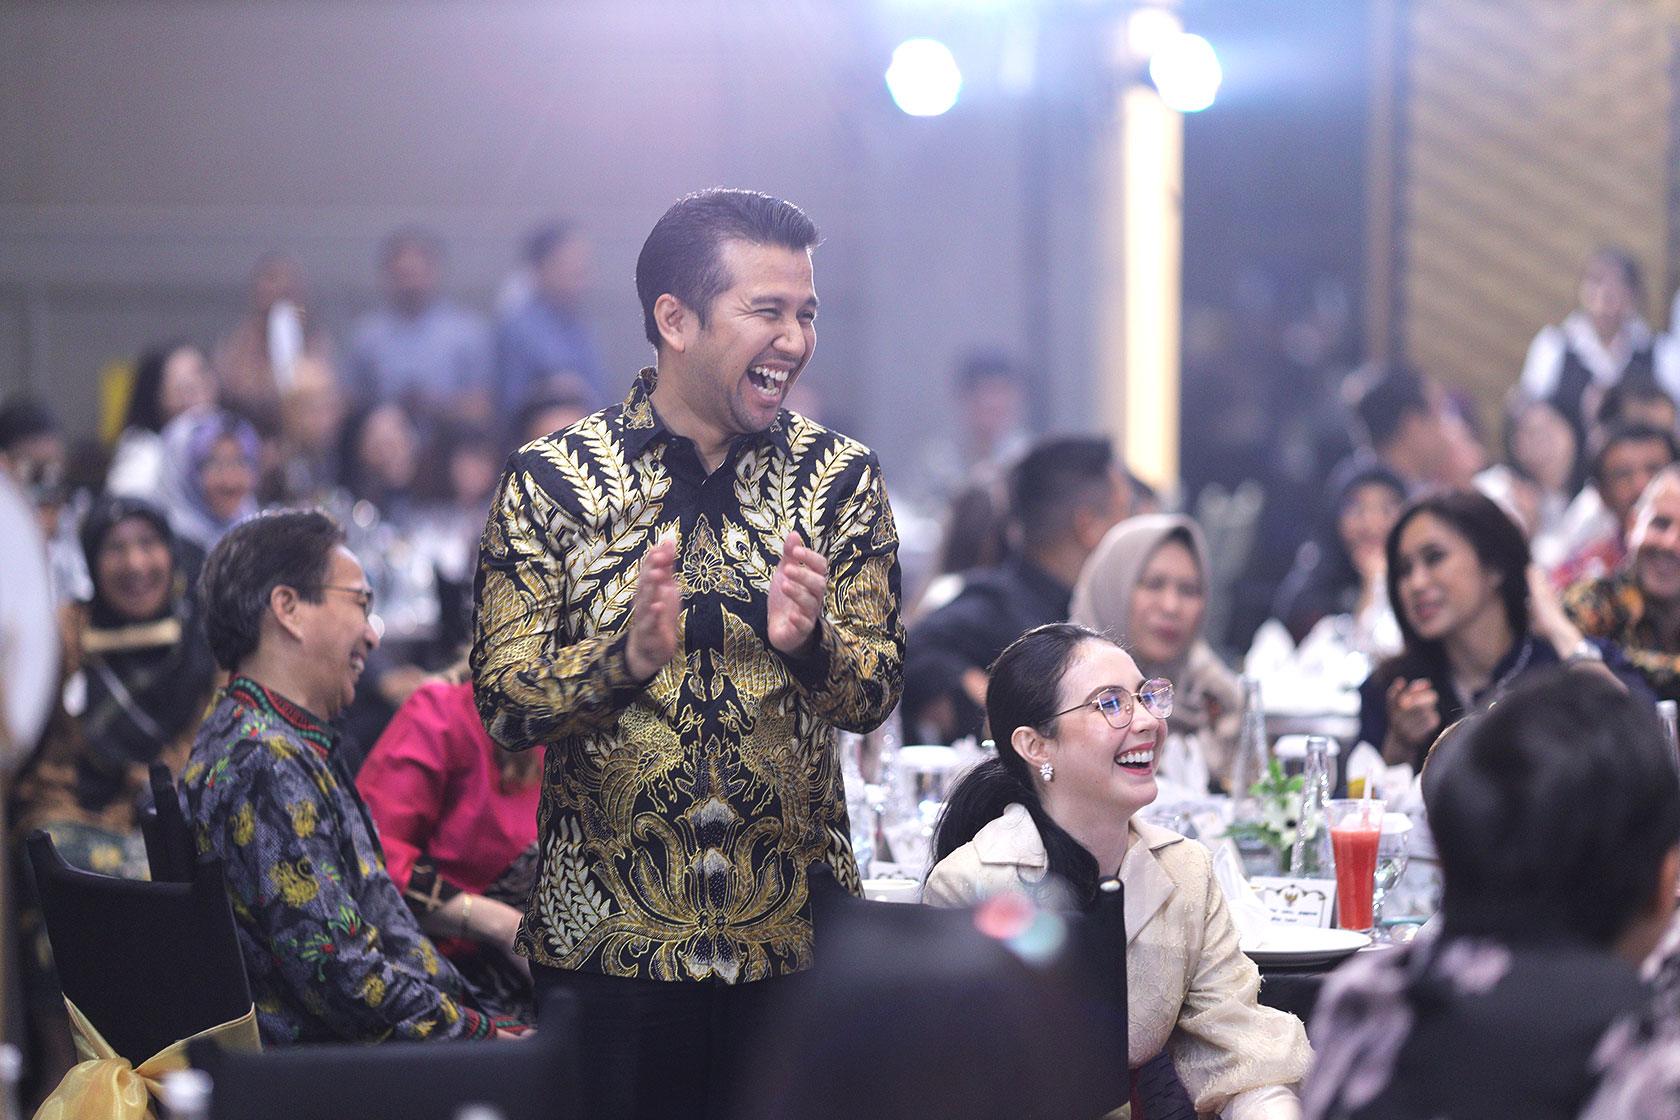 Emil Dardak, Vice Governor of Surabaya, Jiins in appreciation as he applauds the enthralling Performer